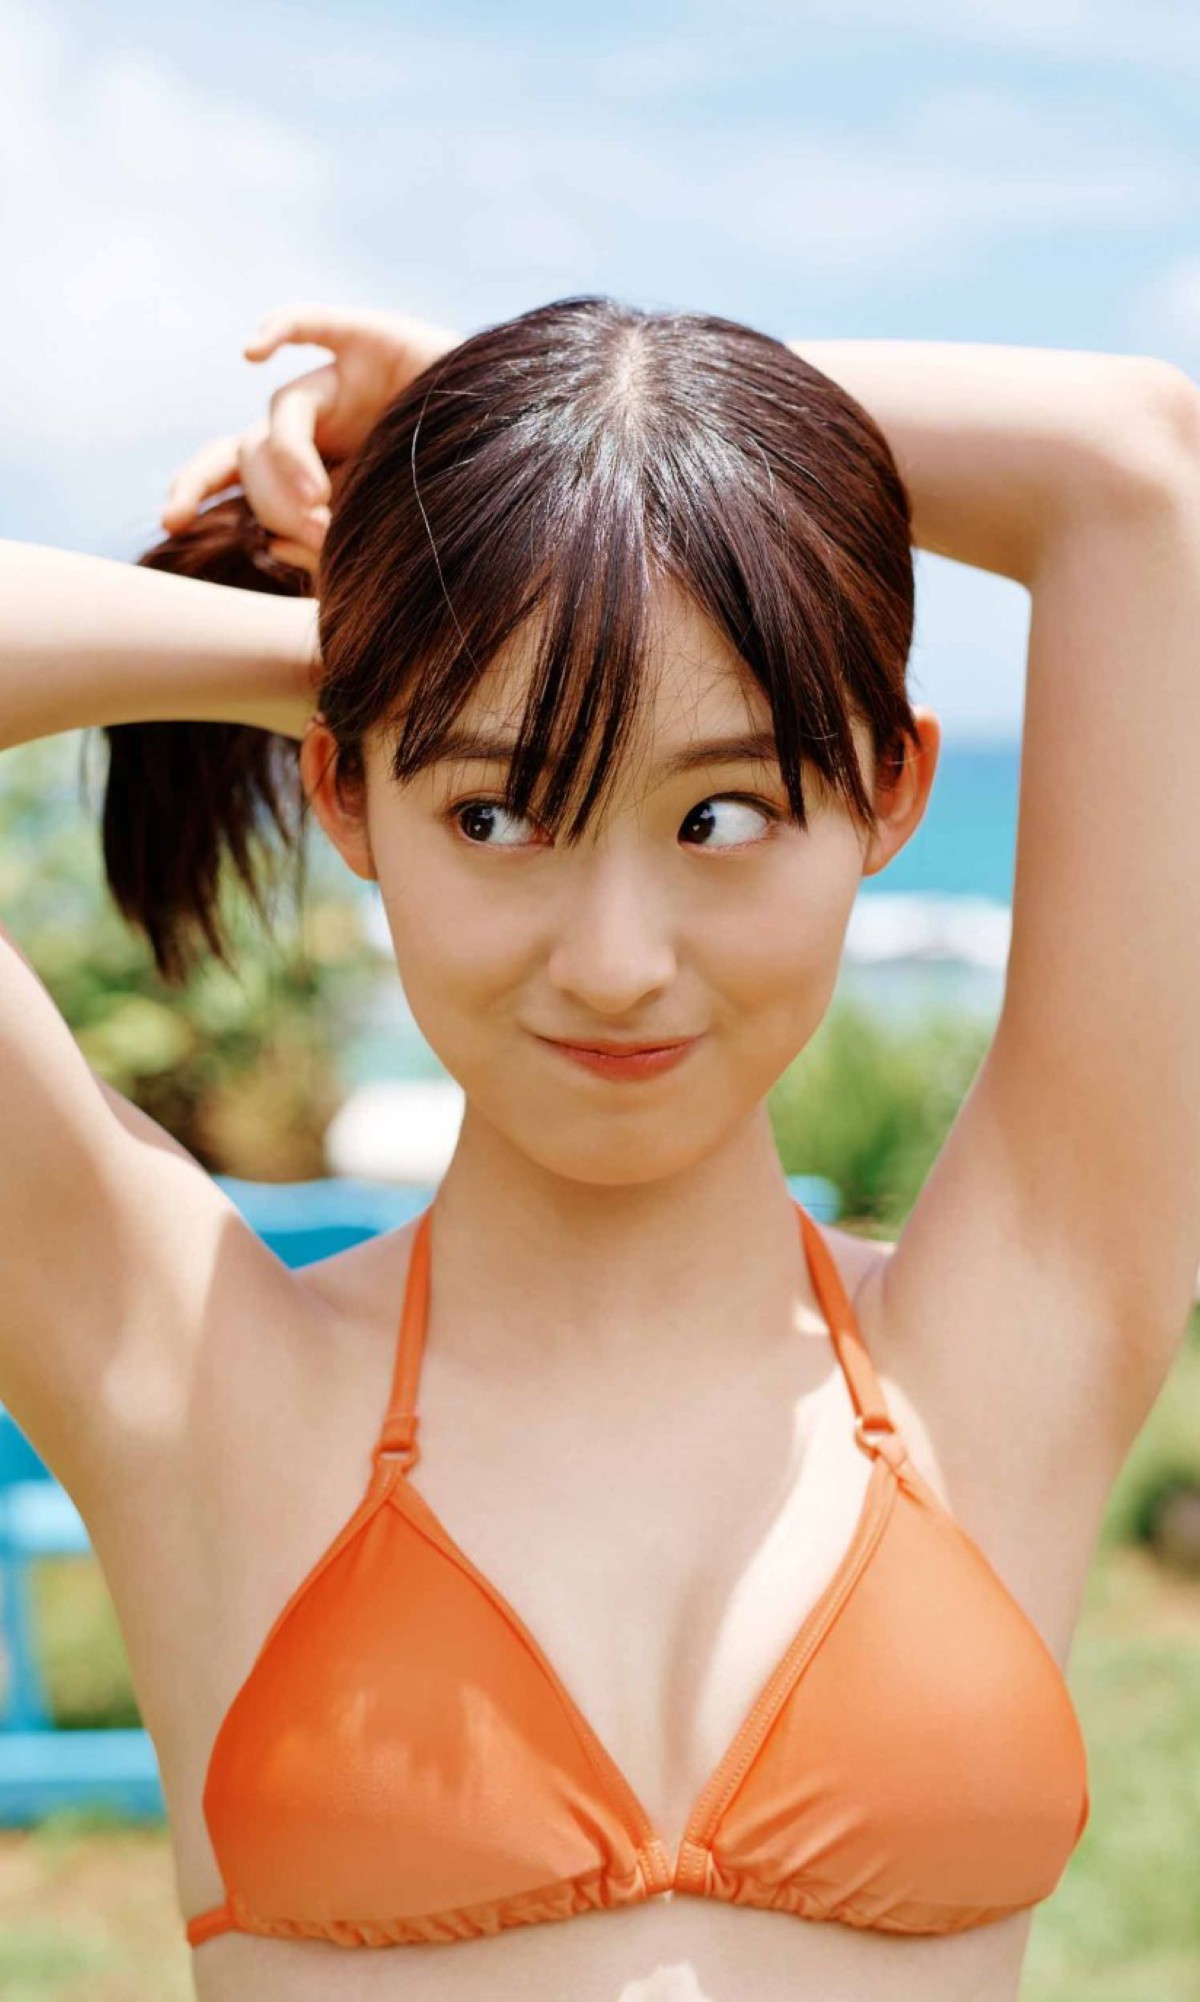 Photobook Ayaka Imoto 井本彩花 The Heroine Is Dignified And Beautiful 17 Years Old 0019 6455507390.jpg